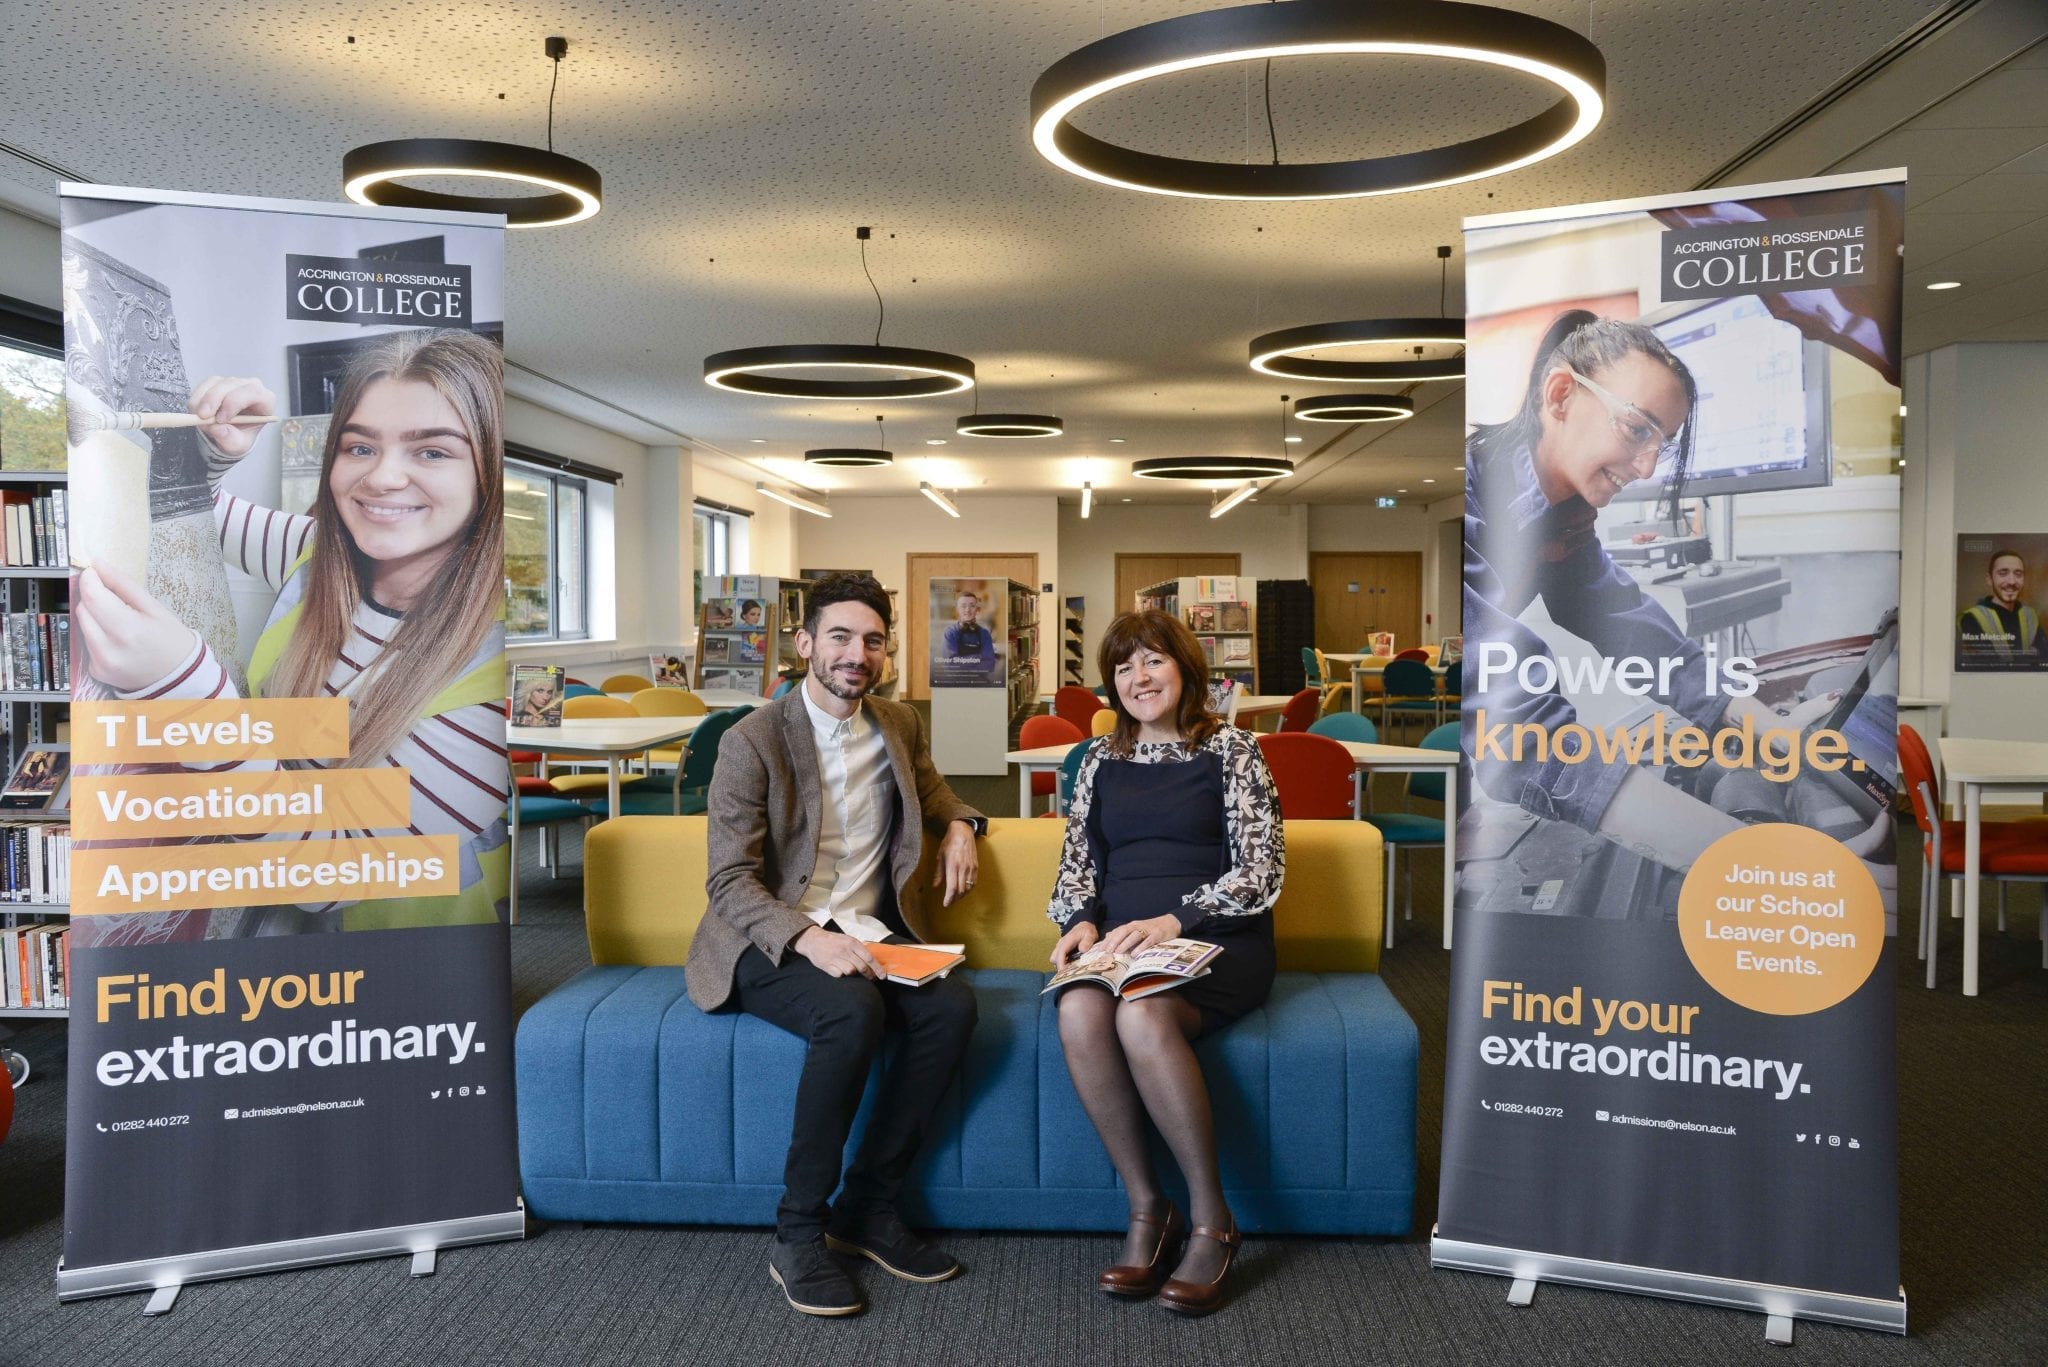 College Group unveils exciting new identity after merger of Nelson and Colne and Accrington and Rossendale institutions